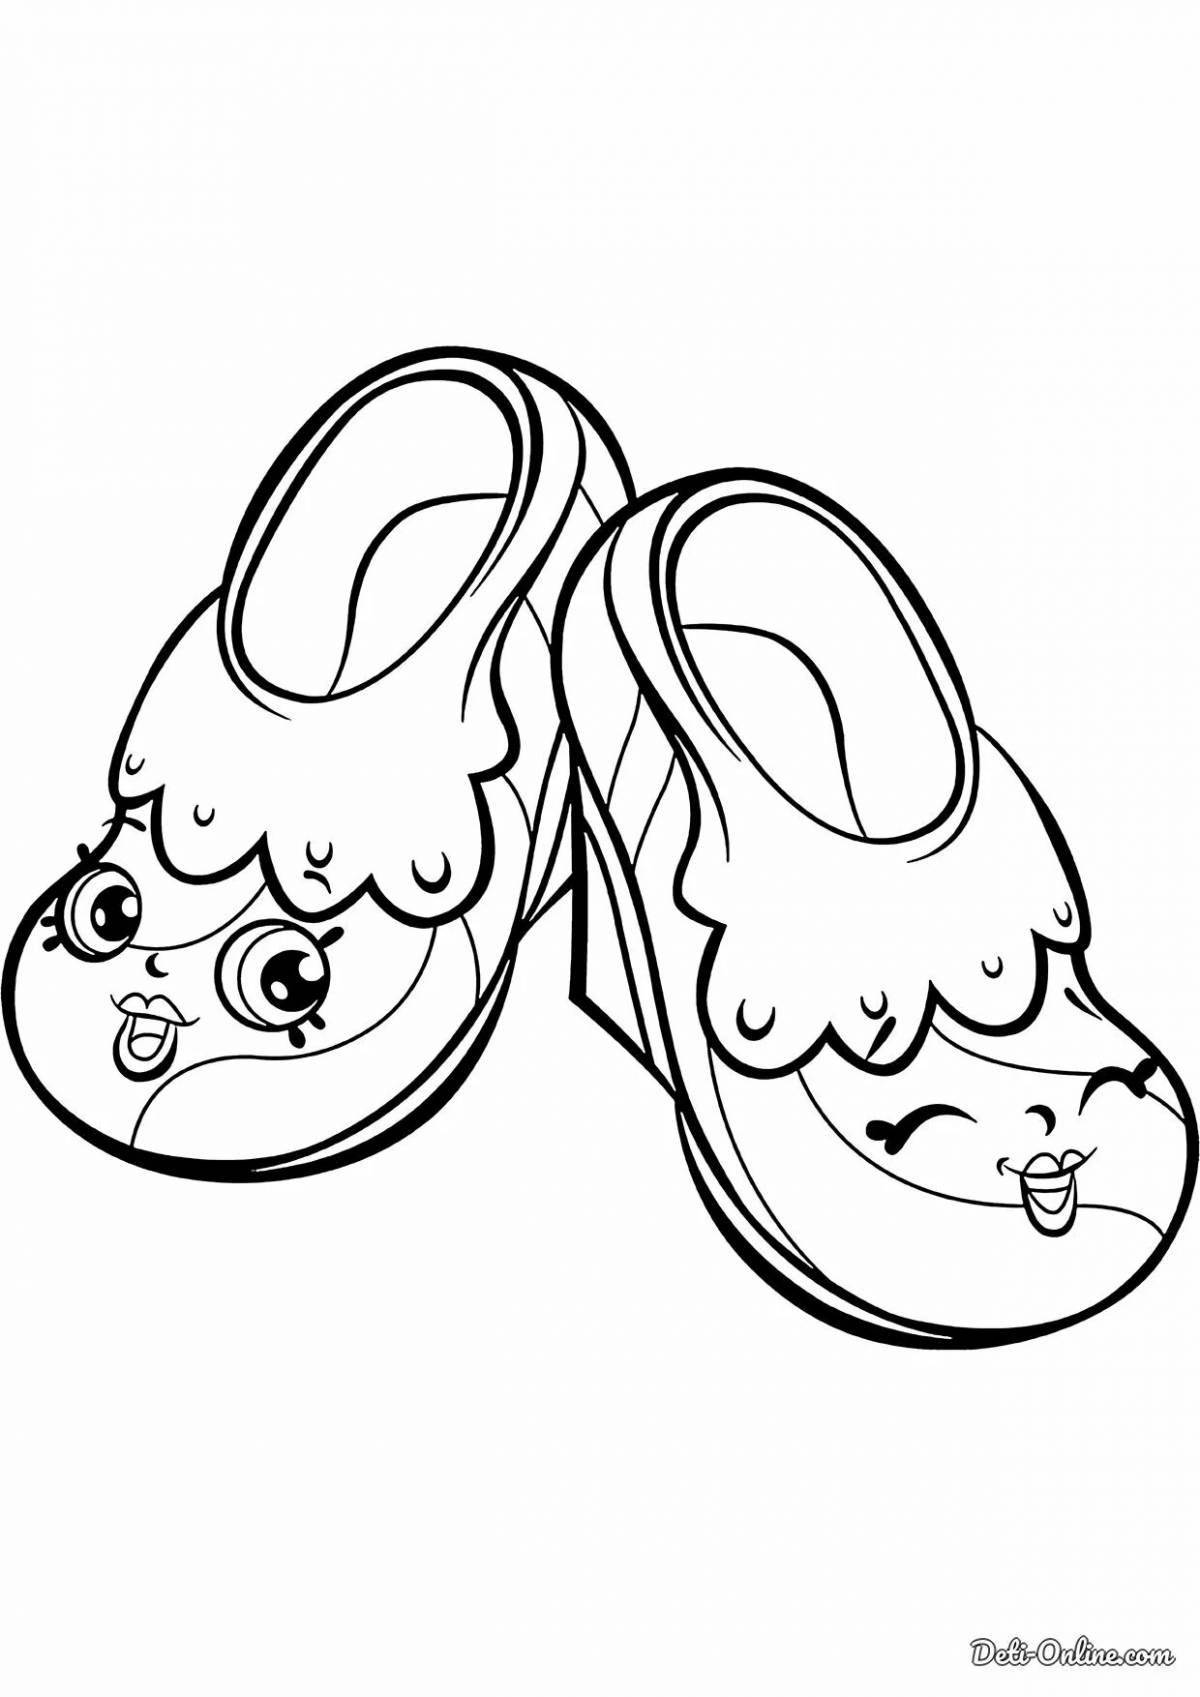 Coloring book fantastic slippers for kids